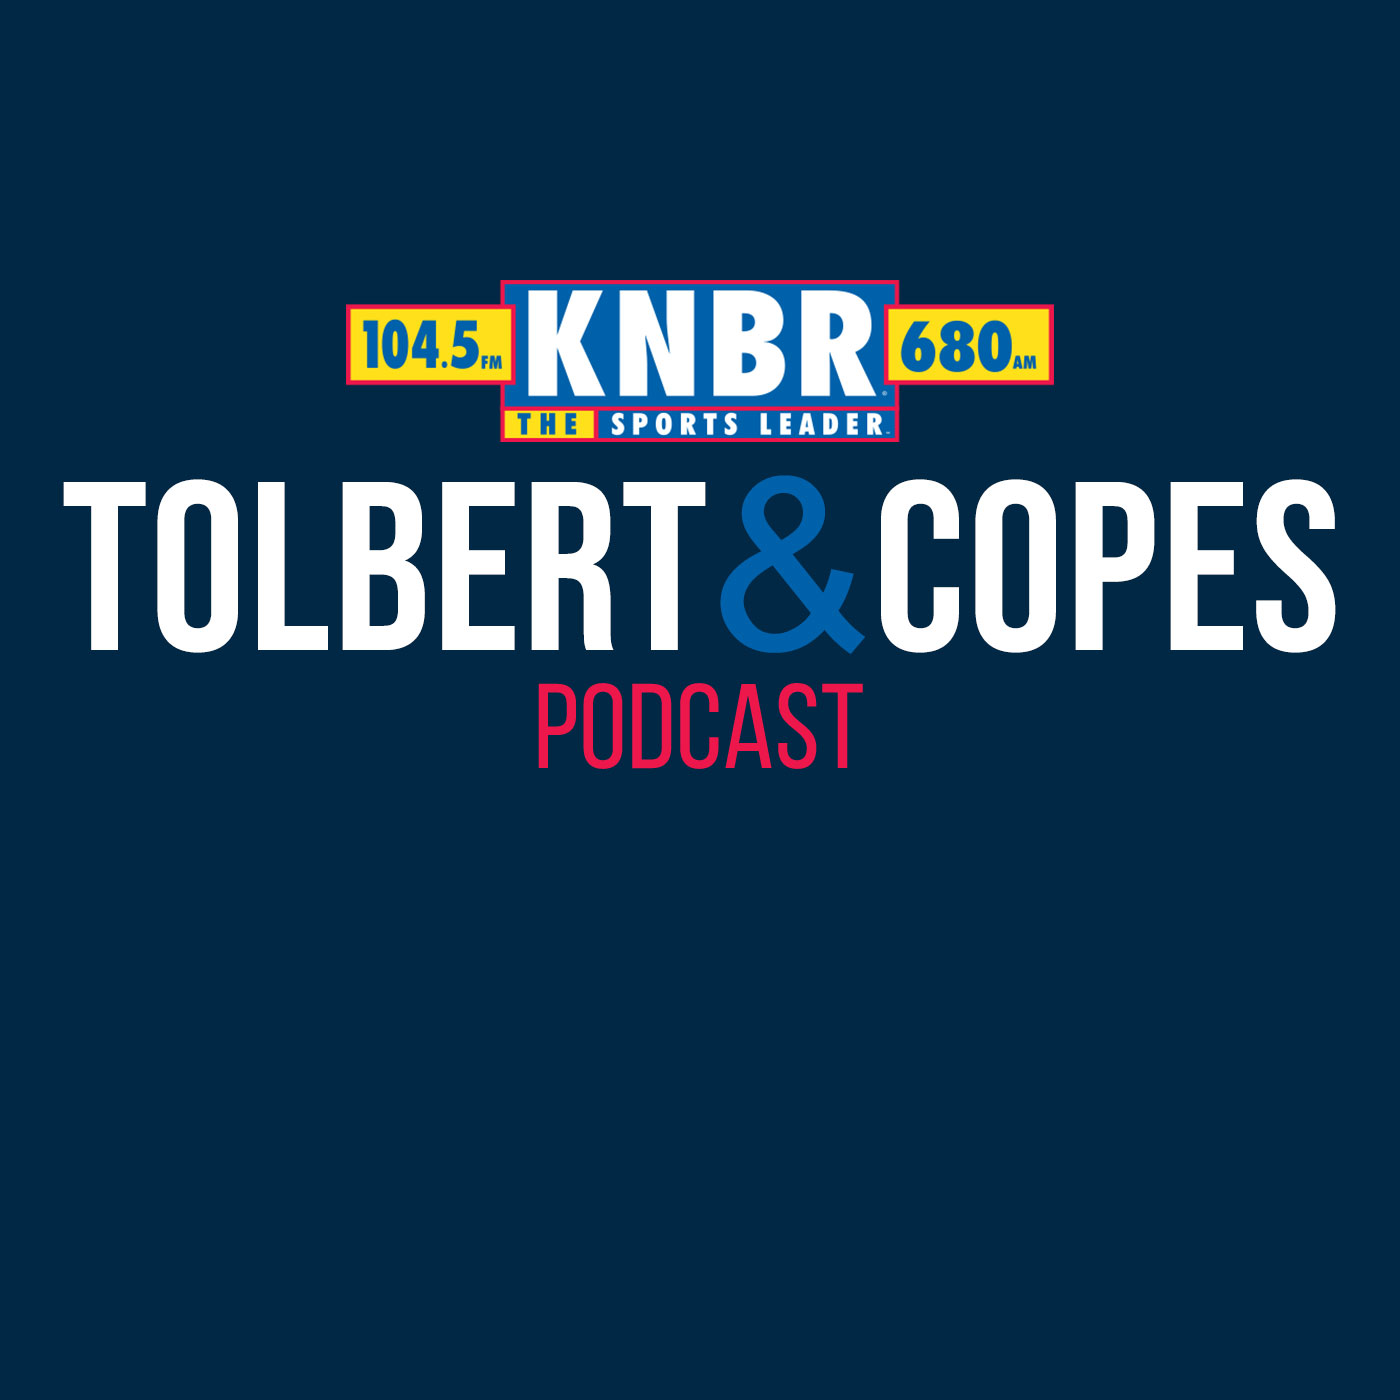 6-24 Jeremy Affeldt joins Tolbert & Copes to discuss his best ejections moments in